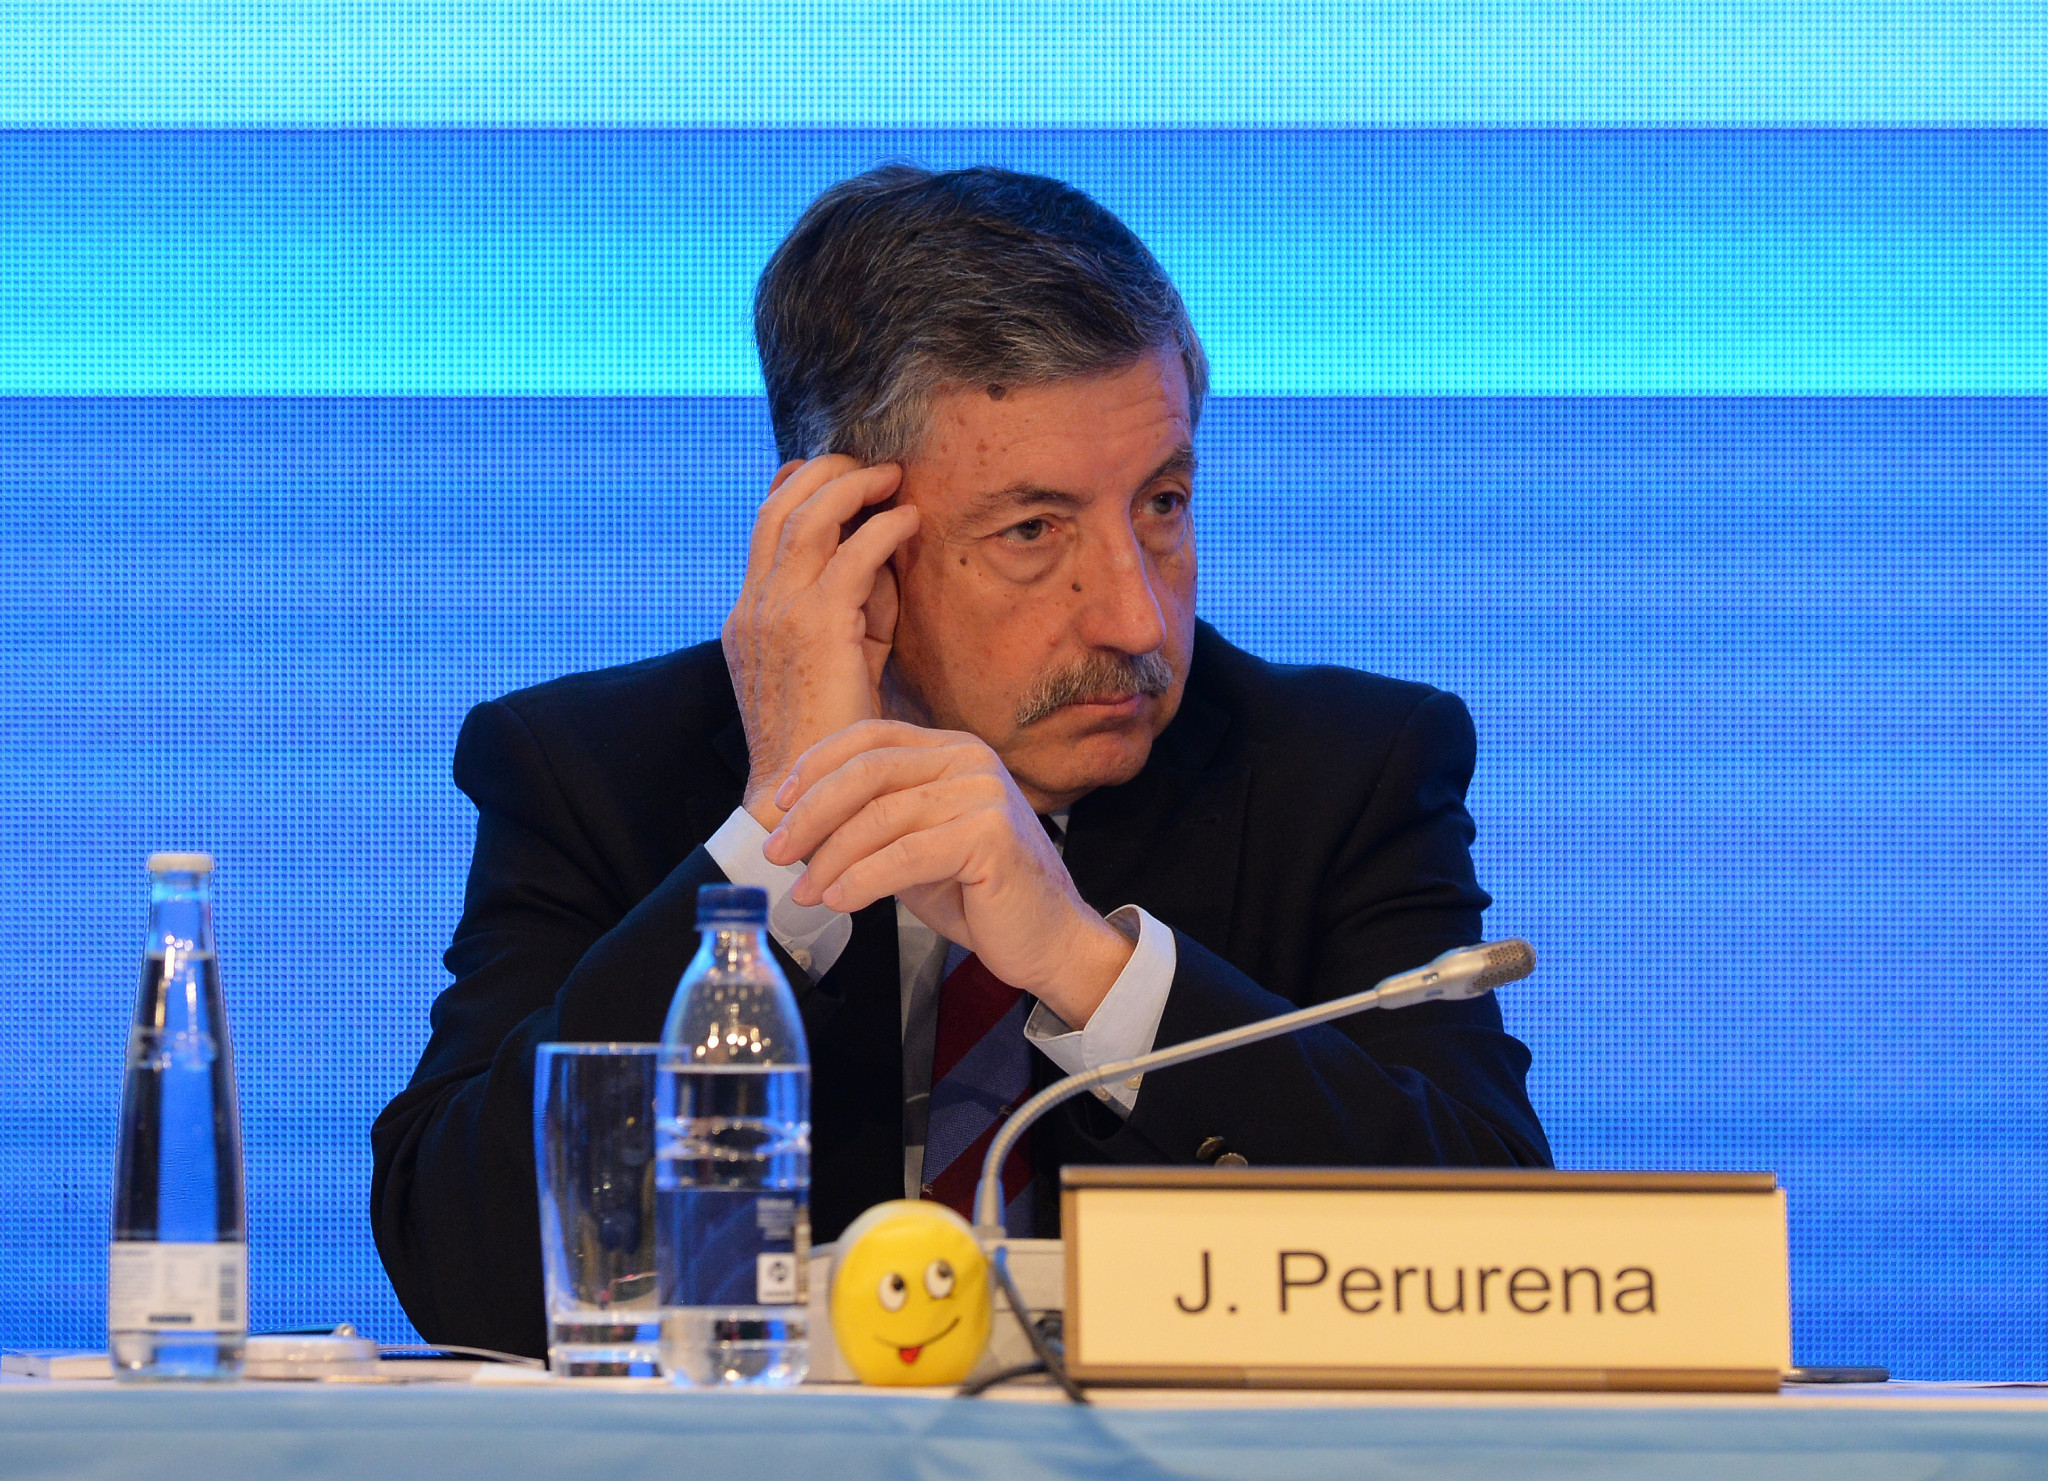 Two candidates are seeking to succeed José Perurena as ICF President ©Getty Images